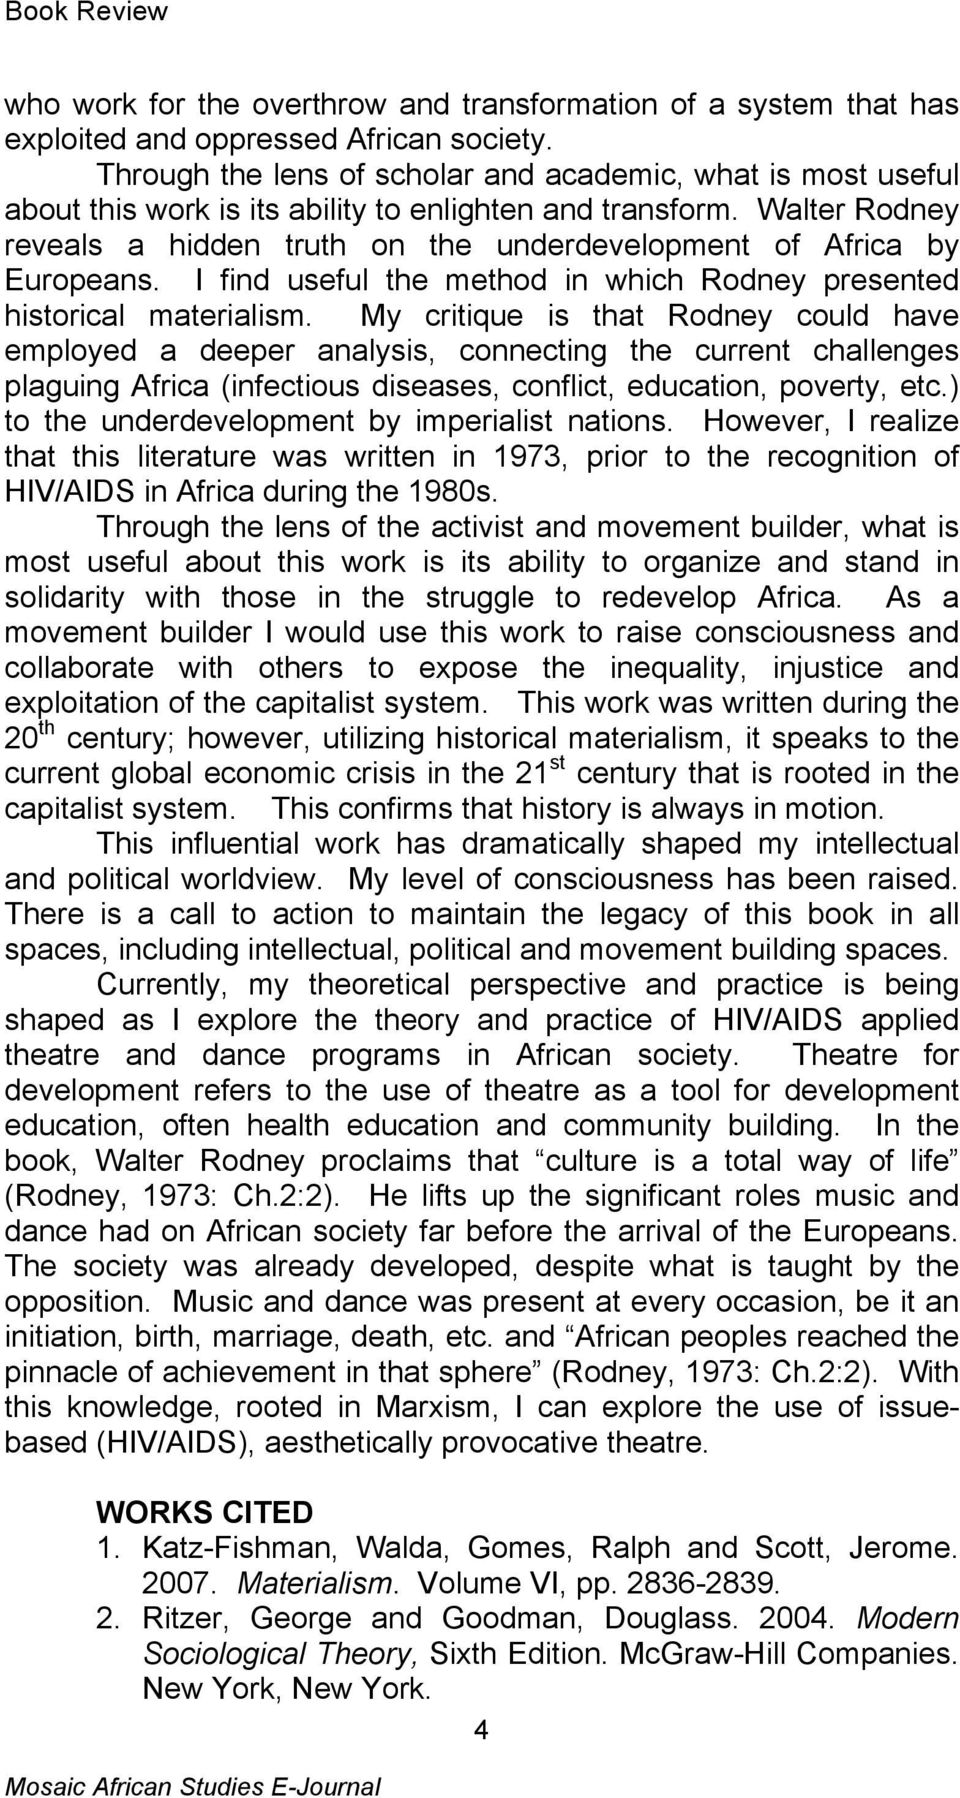 Walter Rodney reveals a hidden truth on the underdevelopment of Africa by Europeans. I find useful the method in which Rodney presented historical materialism.